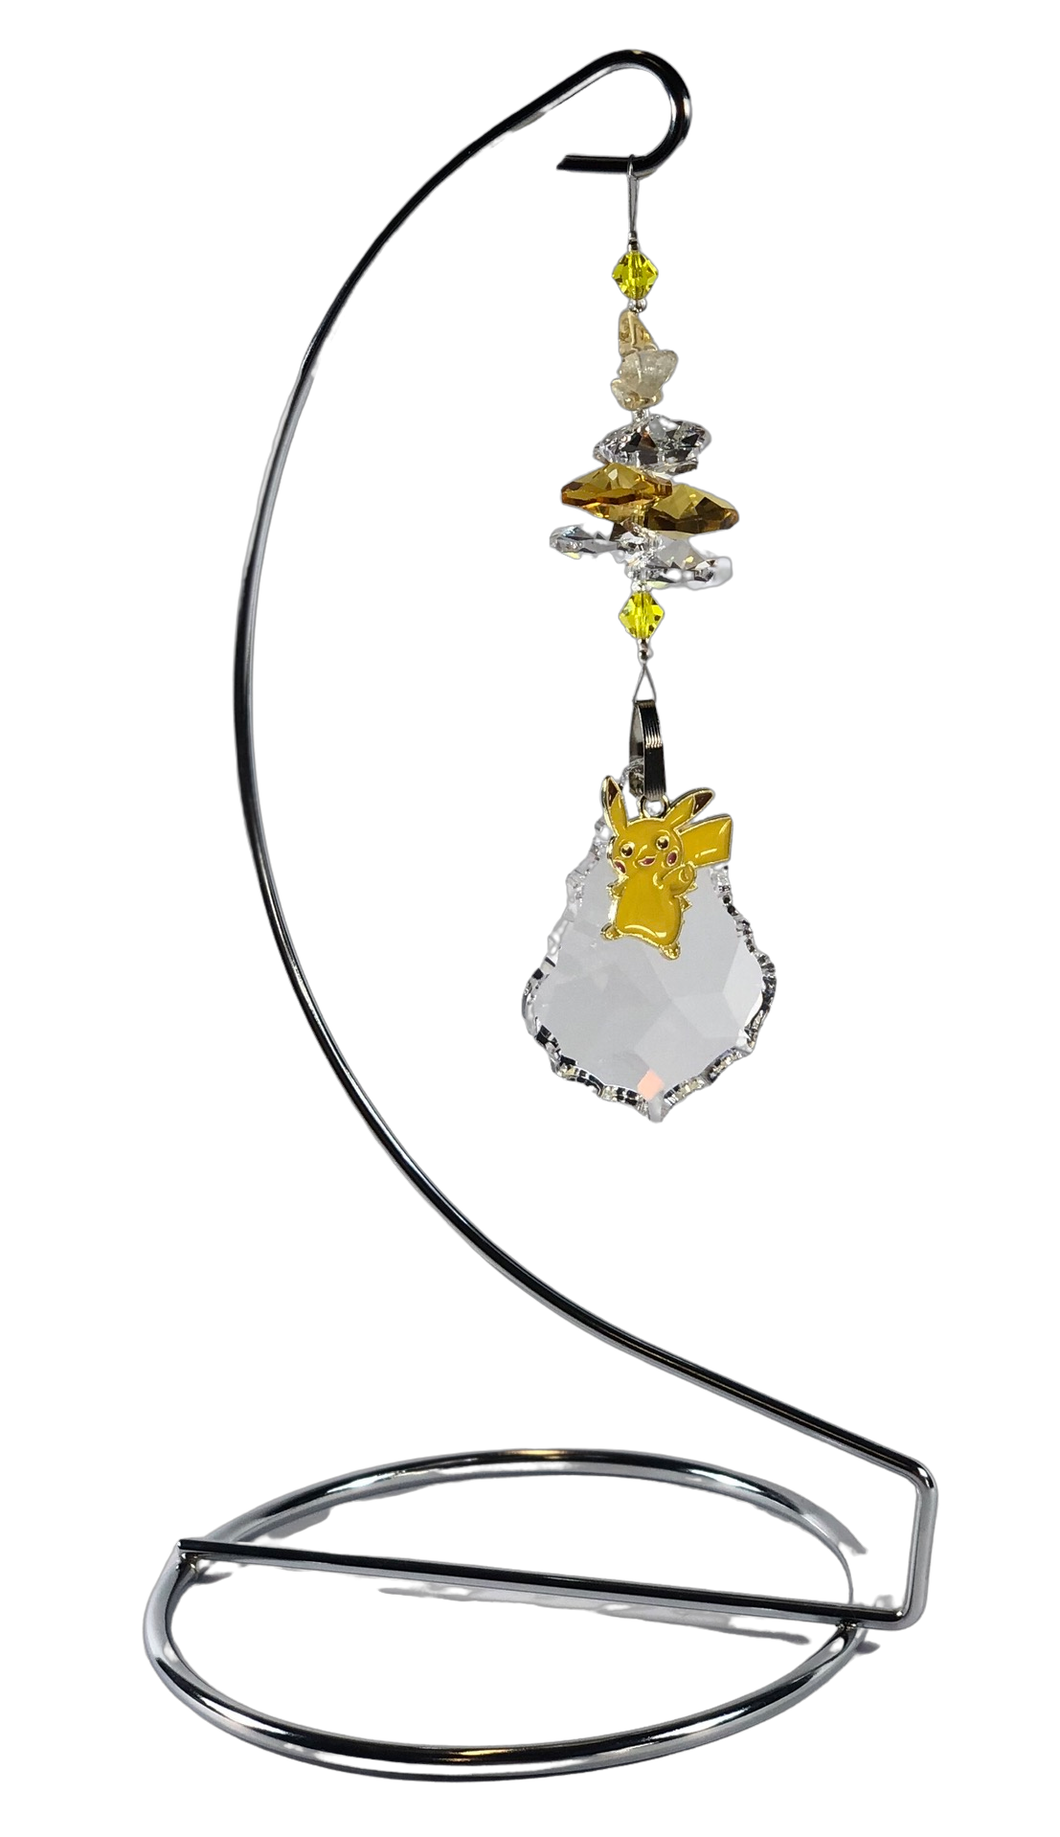 Pokémon - Pikachu crystal suncatcher is decorated with citrine gemstones and come on this amazing stand.